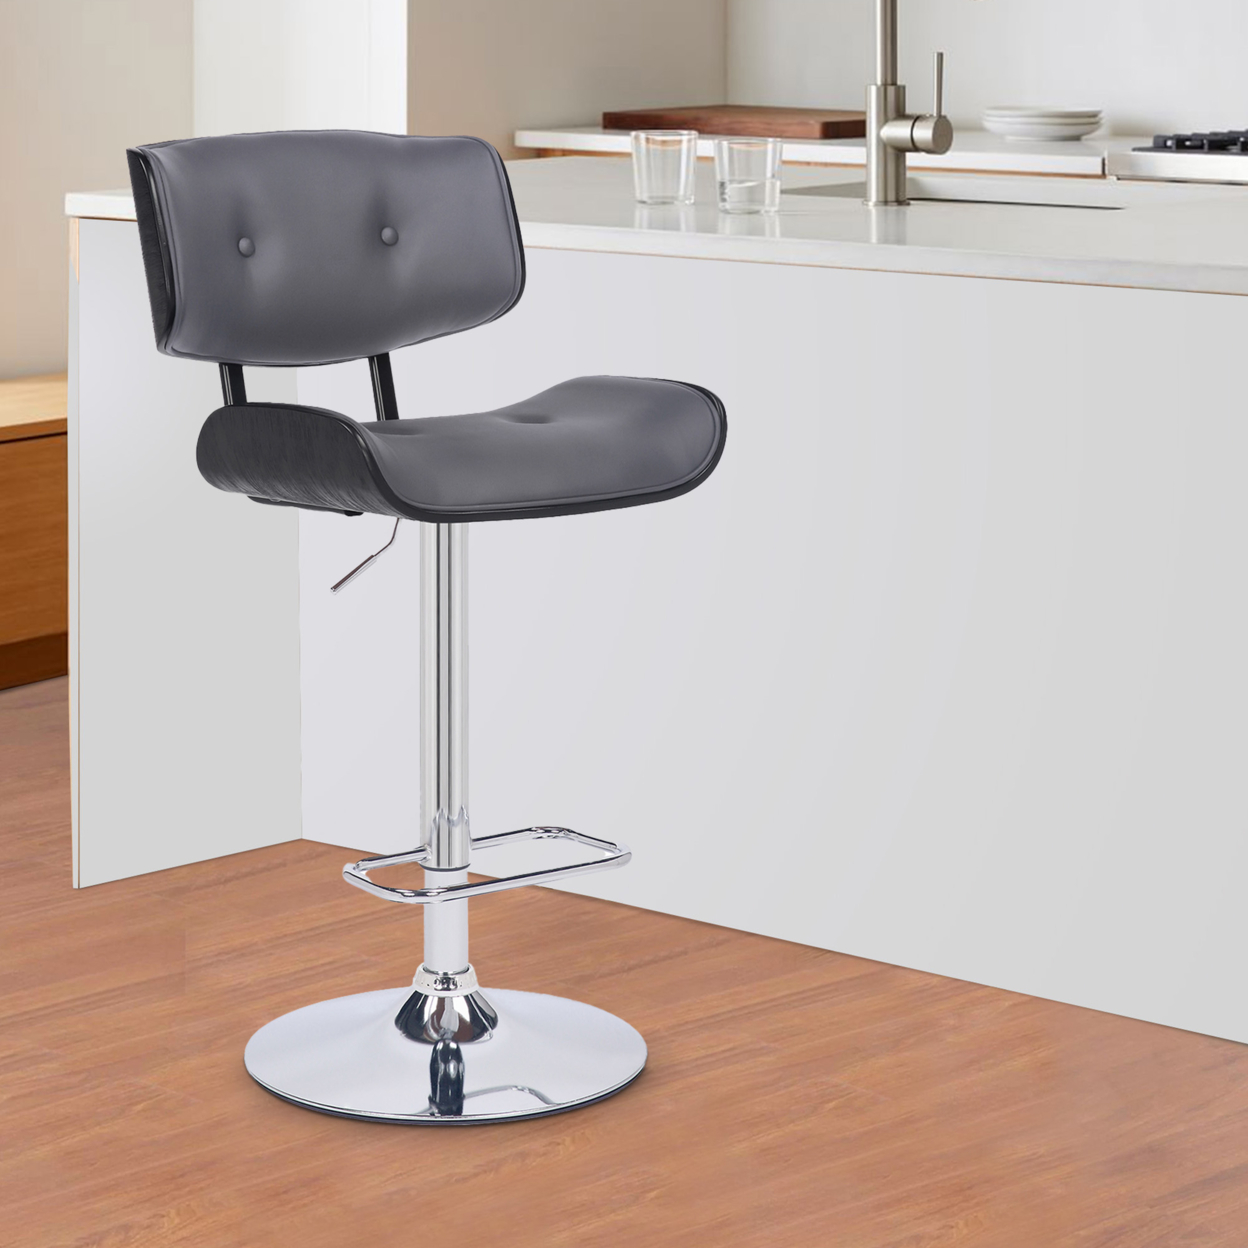 Bar Stool With Leatherette Button Tufted Back And Seat, Gray And Silver- Saltoro Sherpi